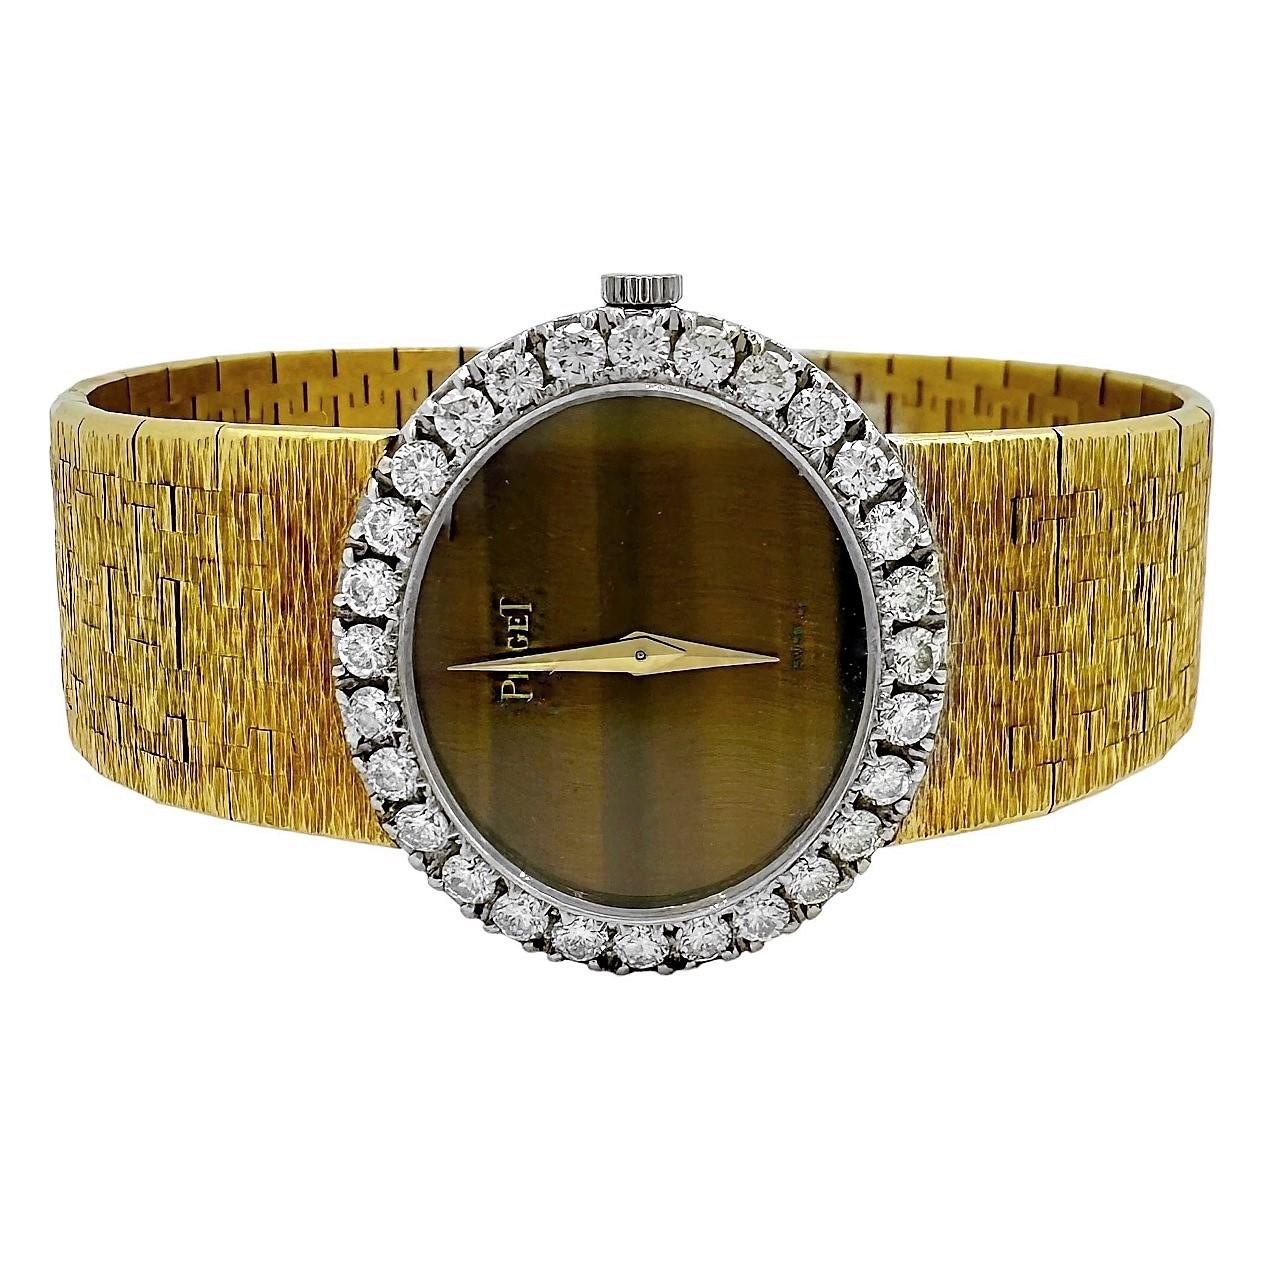 This lovely Mid-20th Century 18k yellow gold  cocktail watch was created in Geneva Switzerland by the venerated maker Piaget. It is a magnificent example of this integral band, hard stone and diamond series which were the epitome of elegance and